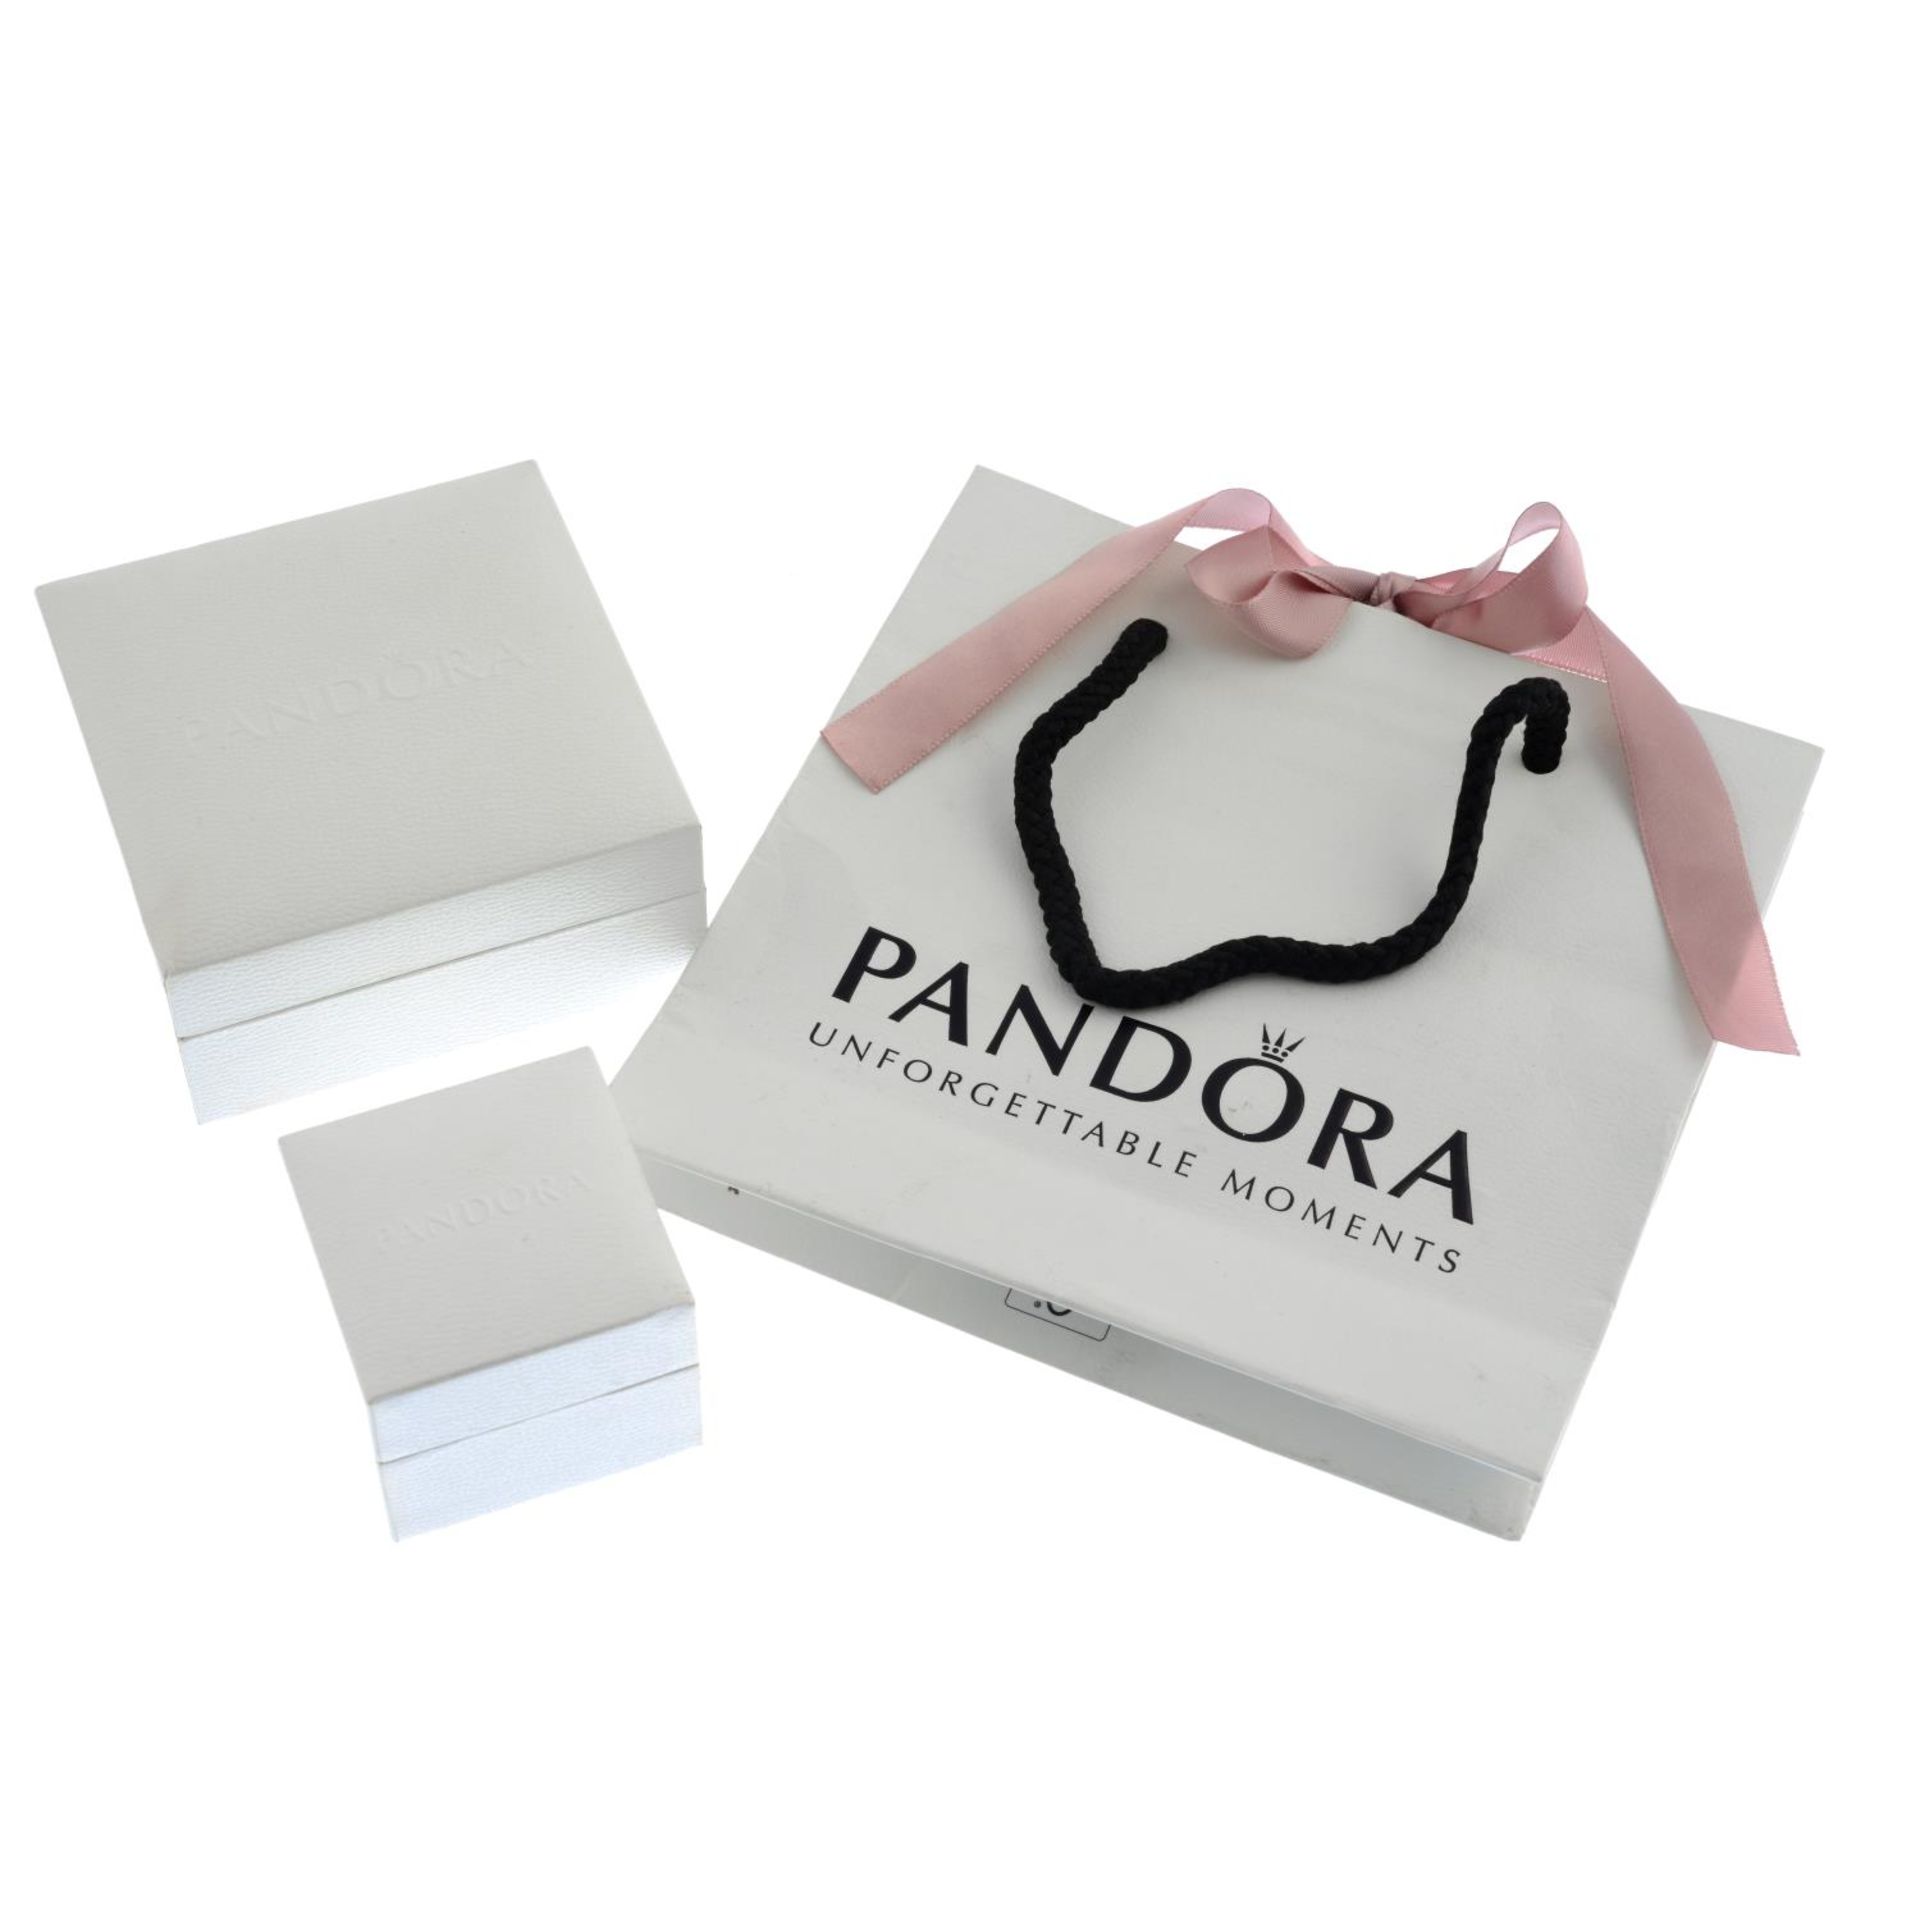 A selection of Pandora boxes and gift bags.